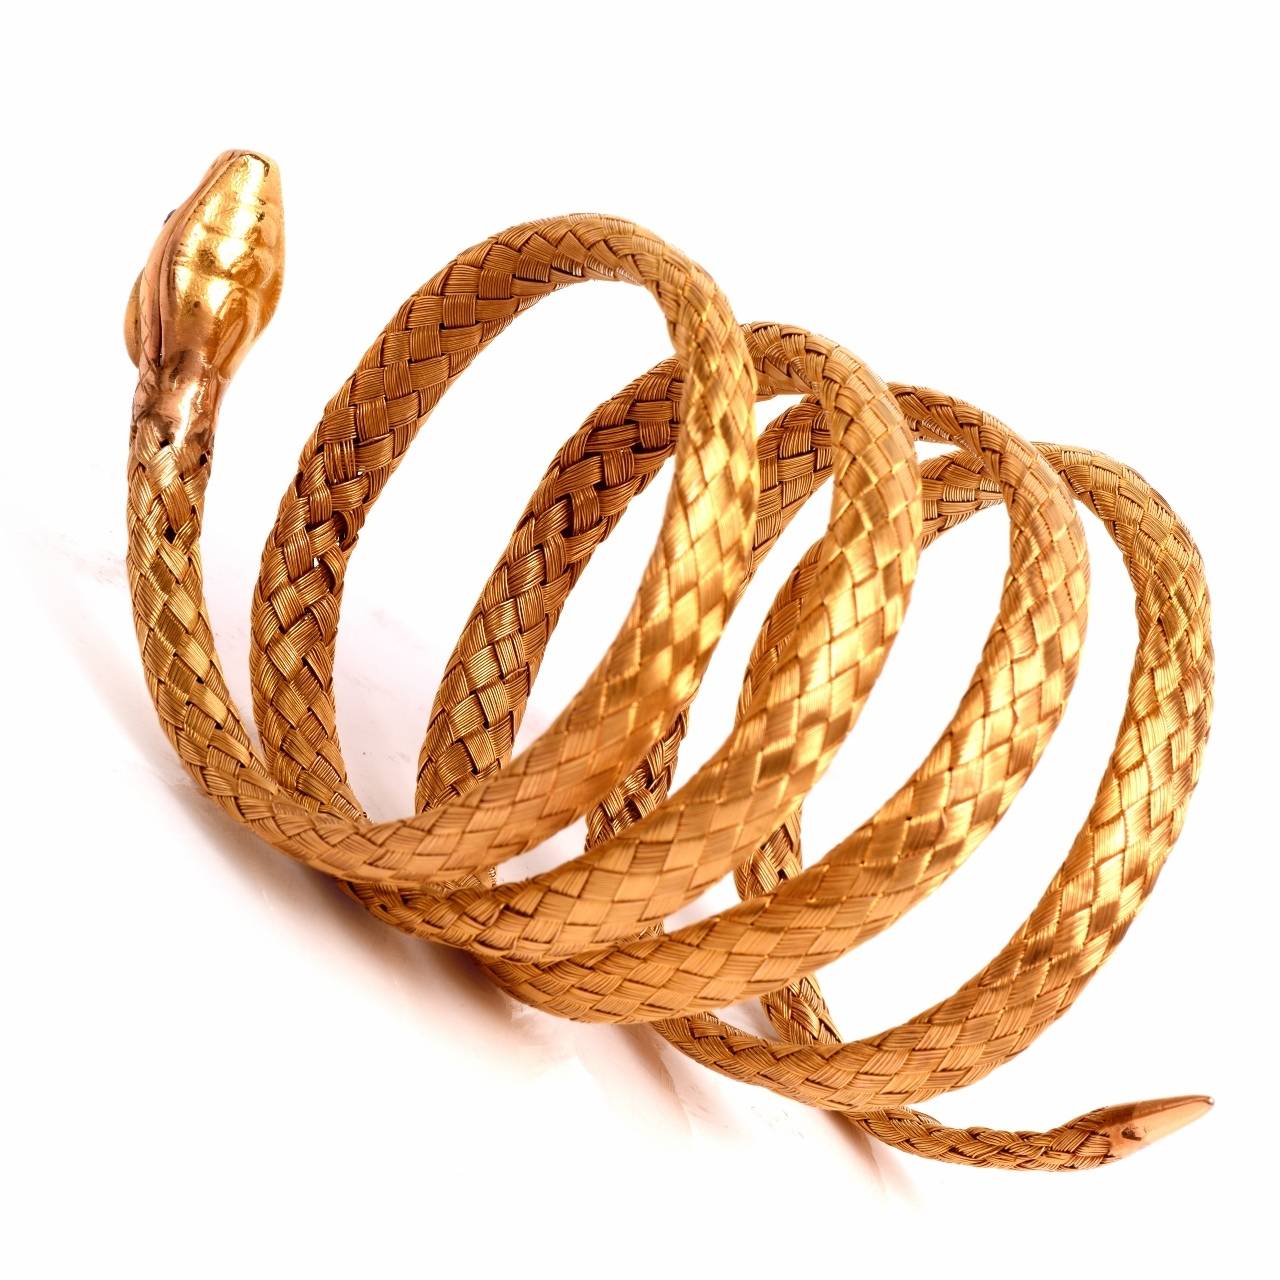 This fascinating antique flexible bracelet of artistic design and meticulous craftsmanship is rendered in an enchanting woven pattern in solid 18K yellow gold, weighing approximately 57 grams. This alluringly feminine bracelet depicts the 